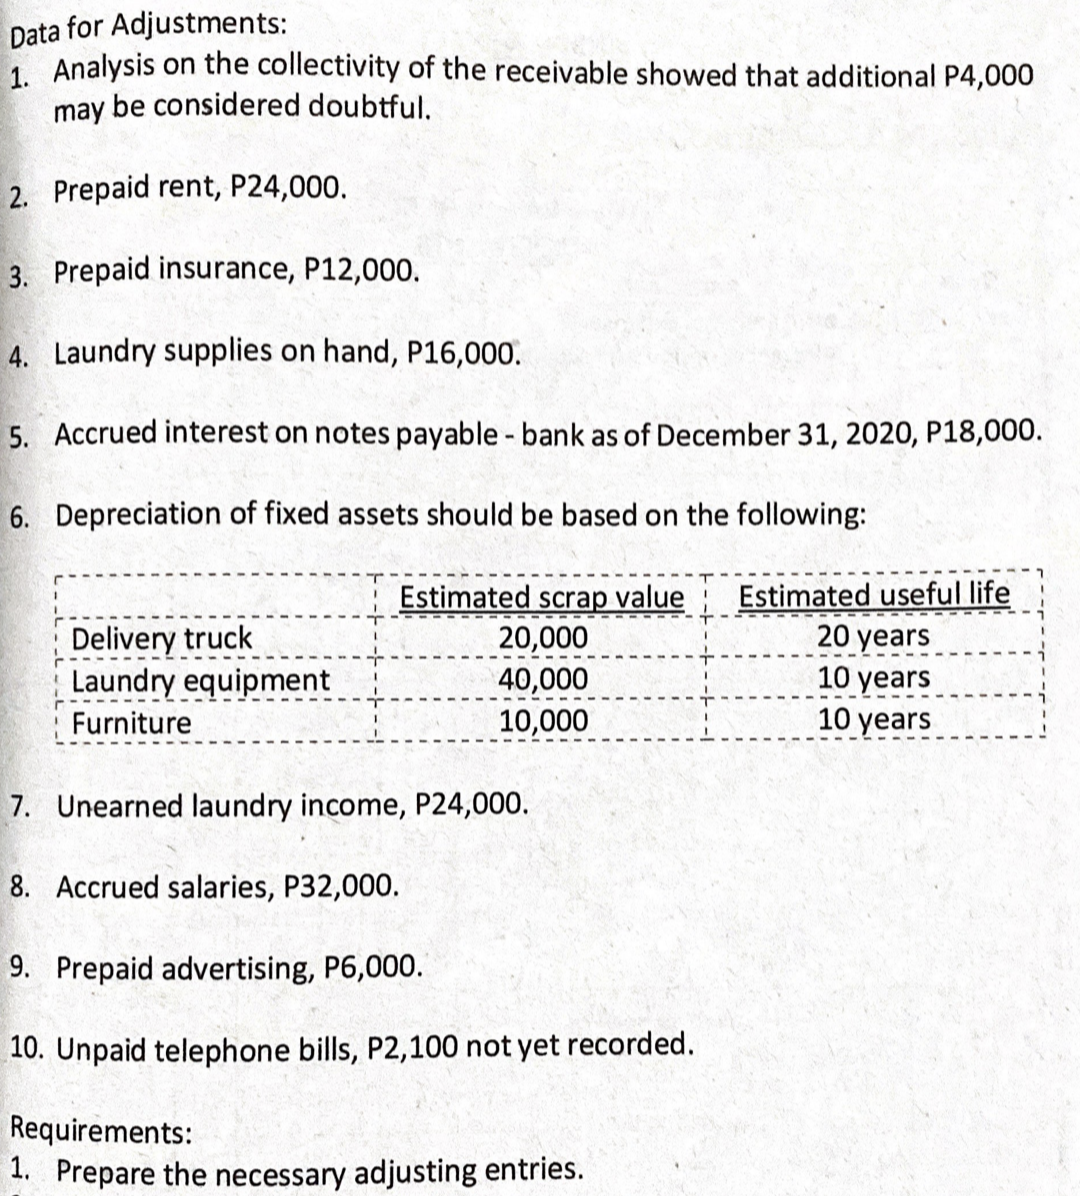 Data for Adjustments:
1 Analysis on the collectivity of the receivable showed that additional P4,000
may be considered doubtful.
2. Prepaid rent, P24,000.
3. Prepaid insurance, P12,000.
4. Laundry supplies on hand, P16,000.
5. Accrued interest on notes payable - bank as of December 31, 2020, P18,000.
6. Depreciation of fixed assets should be based on the following:
Estimated scrap value
20,000
40,000
10,000
Estimated useful life
20 years
10 years
10 years
Delivery truck
Laundry equipment
Furniture
7. Unearned laundry income, P24,000.
8. Accrued salaries, P32,000.
9. Prepaid advertising, P6,000.
10. Unpaid telephone bills, P2,100 not yet recorded.
Requirements:
. Prepare the necessary adjusting entries.
